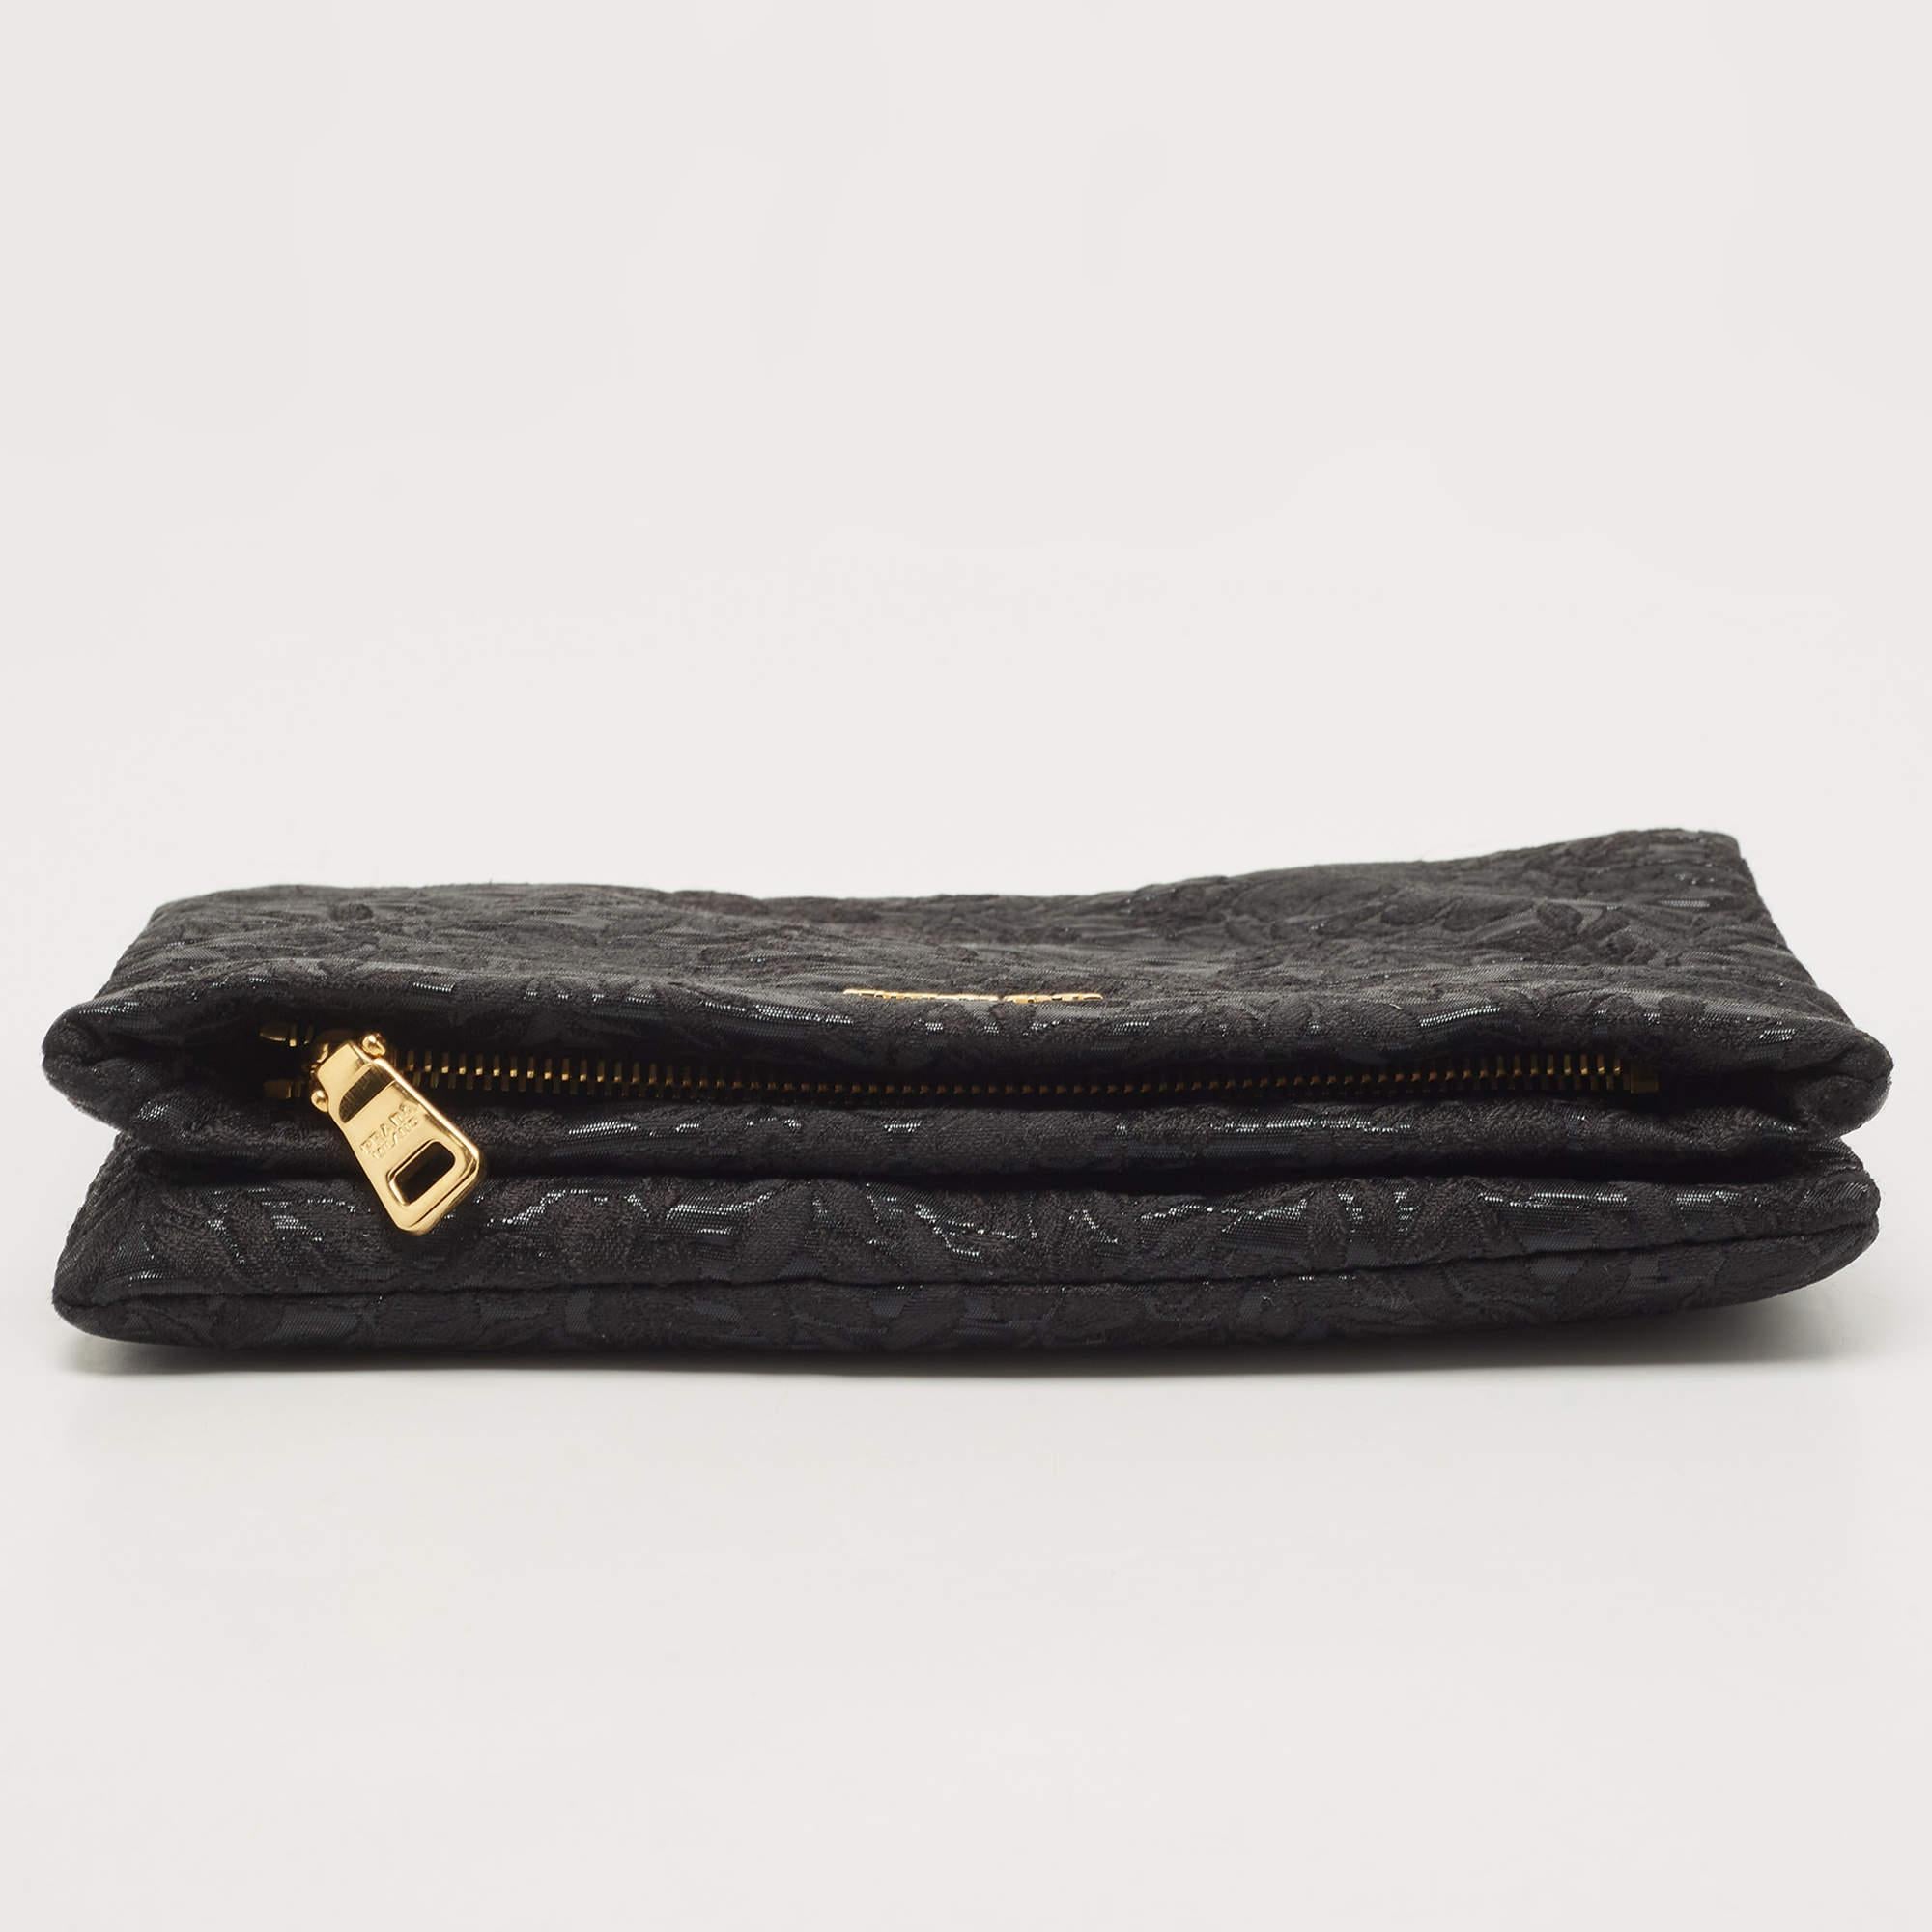 This Prada black clutch for women has the kind of design that ensures high appeal, whether held in your hand or tucked under your arm. It is a meticulously-crafted piece bound to last a long time.

Includes
Original Dustbag